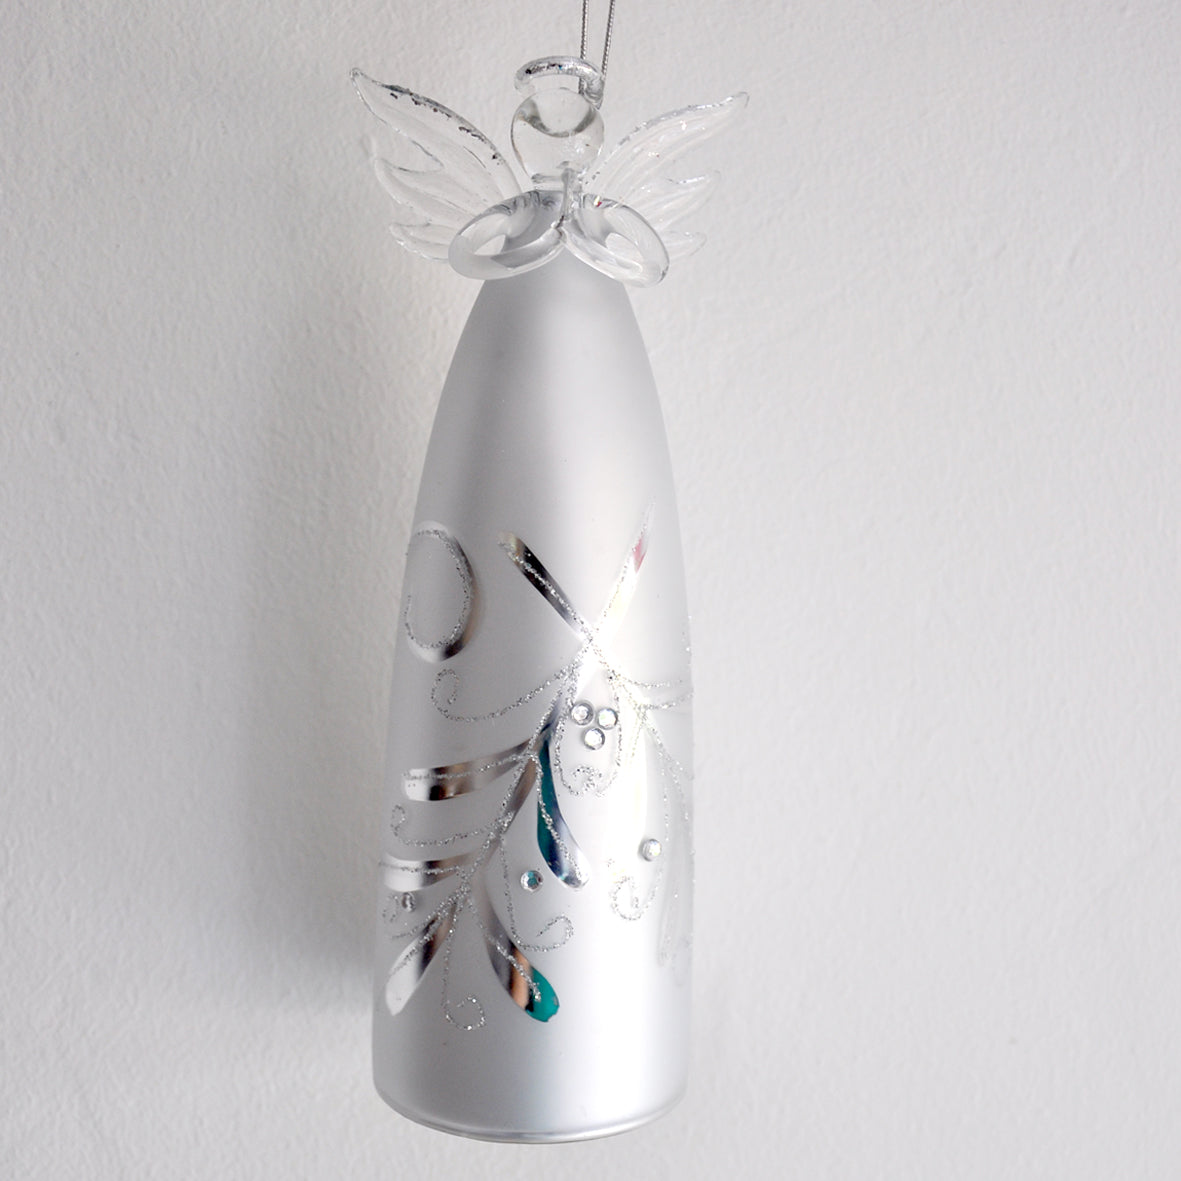 This striking silver angel is made from glass and has a classic mistletoe design on her front.